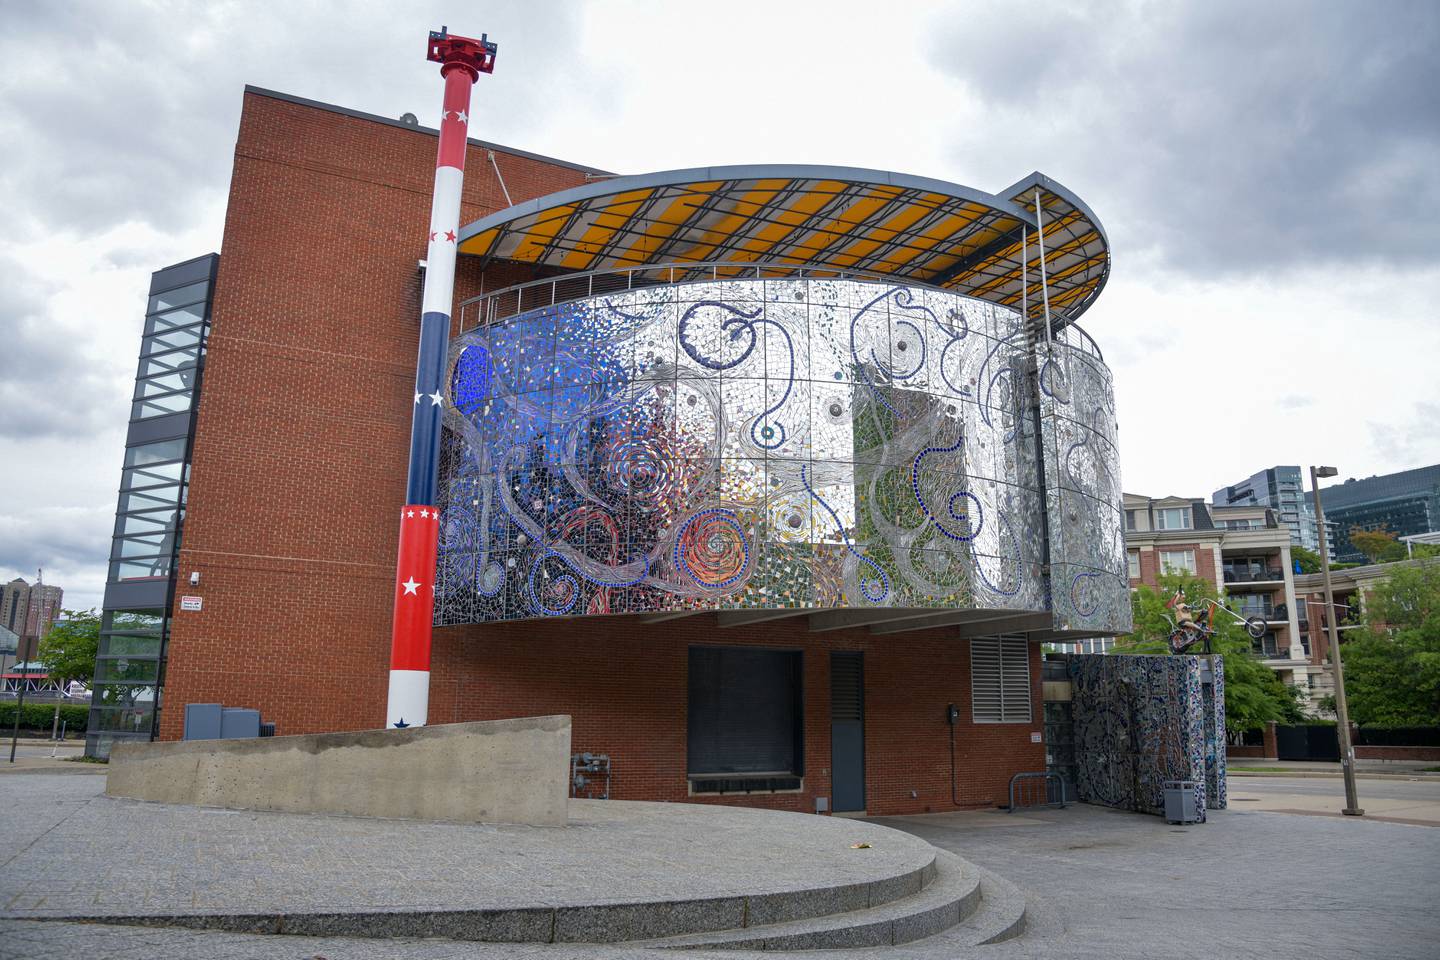 The exterior of the American Visionary Art Museum (AVAM) in South Baltimore.